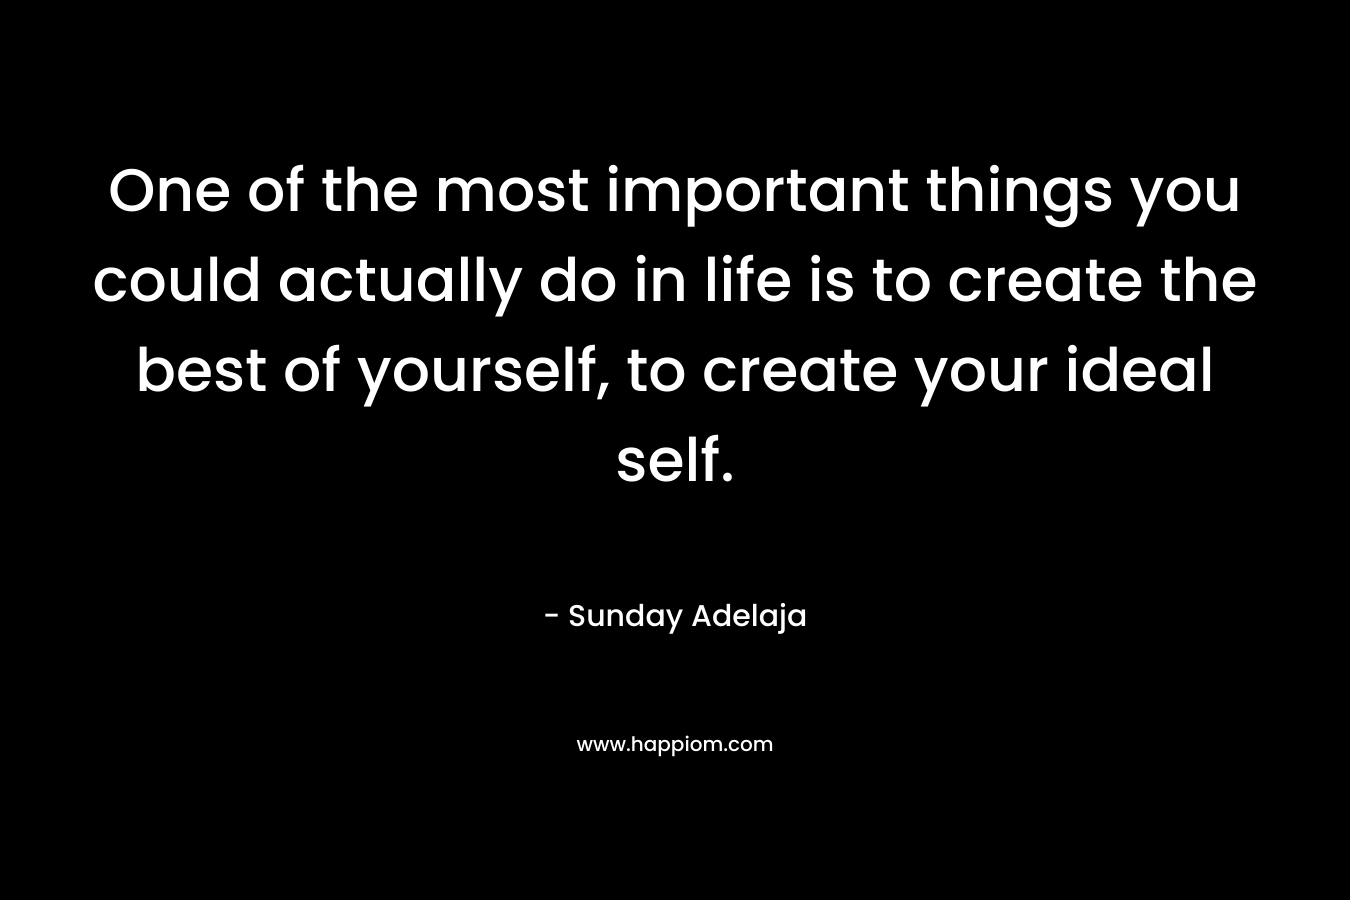 One of the most important things you could actually do in life is to create the best of yourself, to create your ideal self.